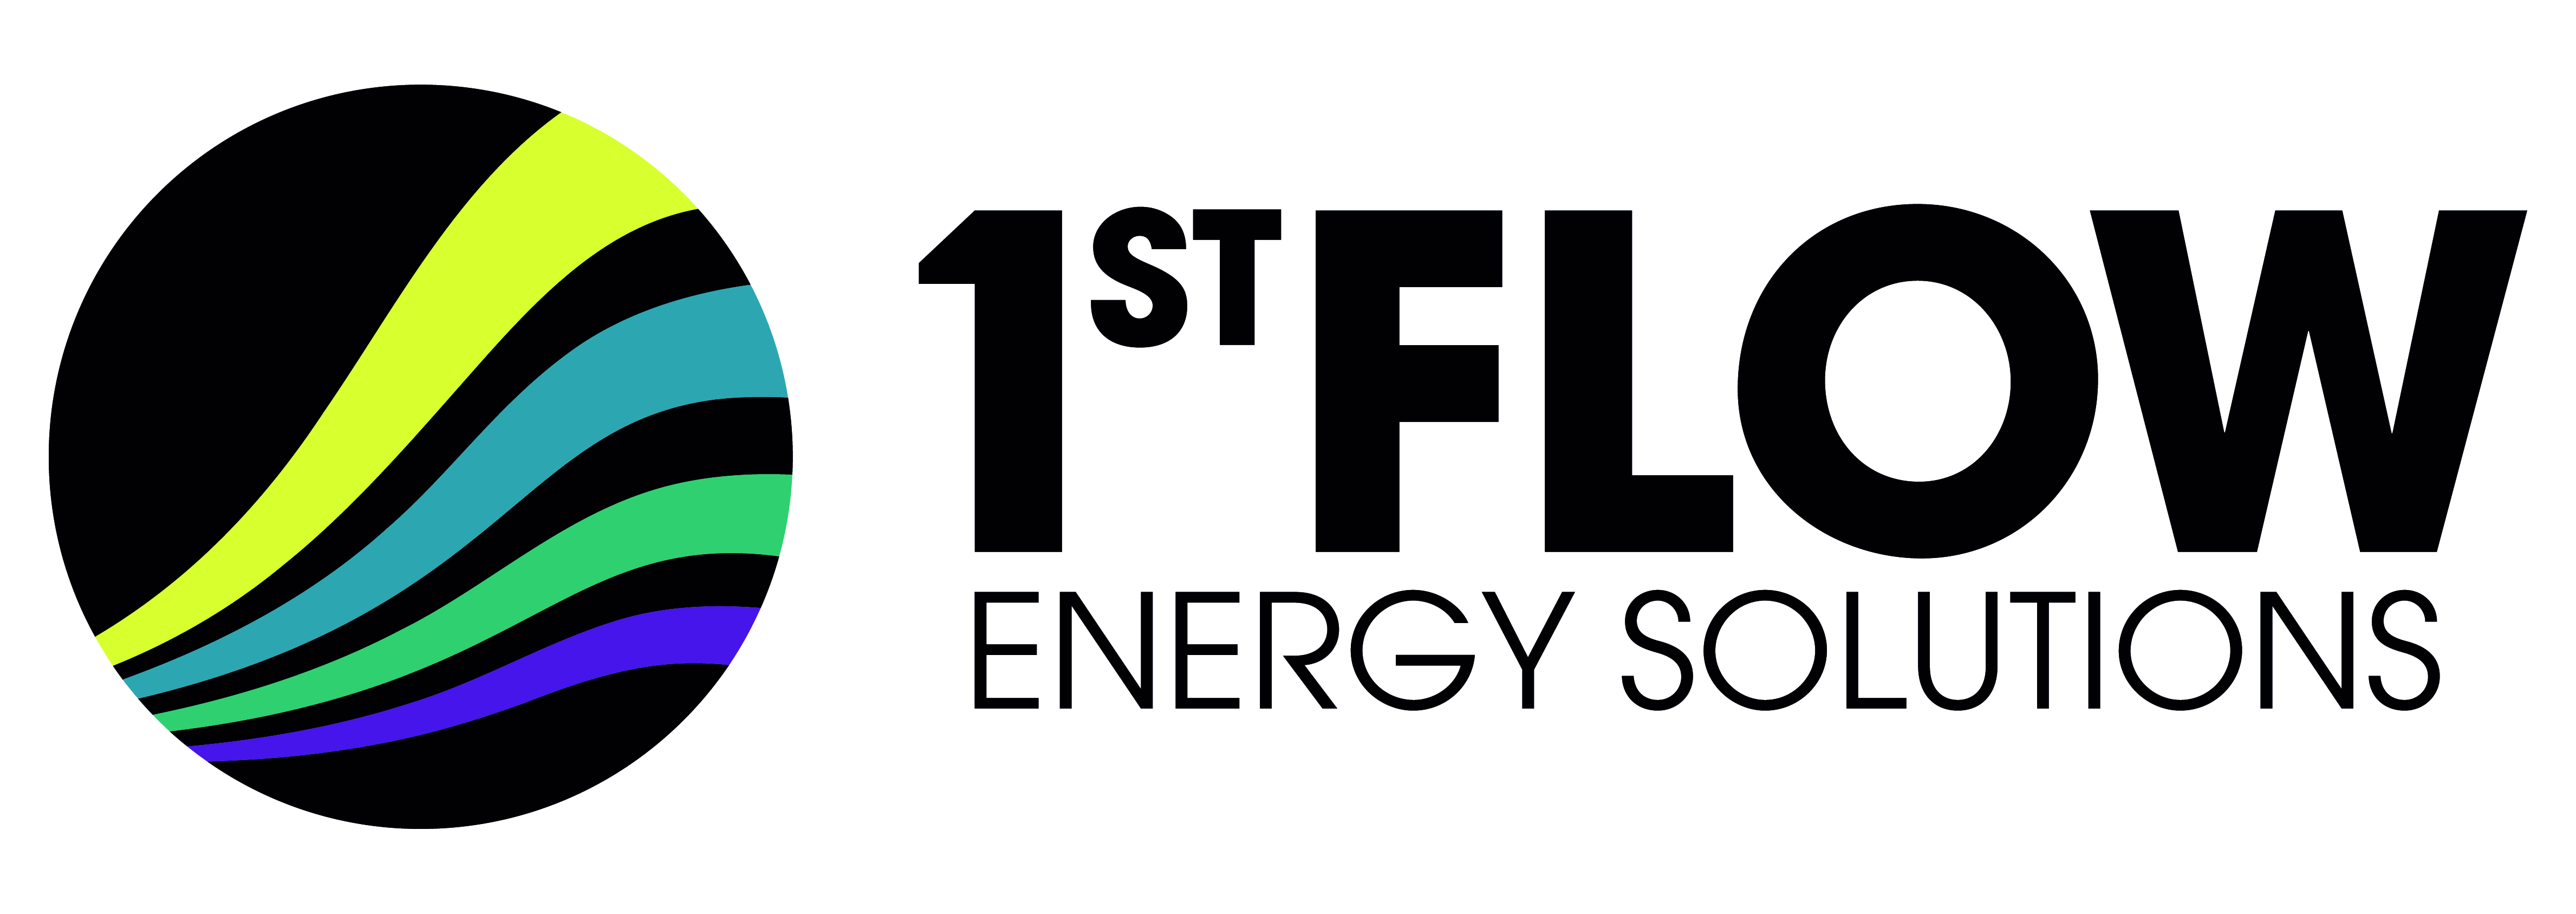 Umfirmierung der Storion Energy GmbH in 1st Flow Energy Solutions GmbH